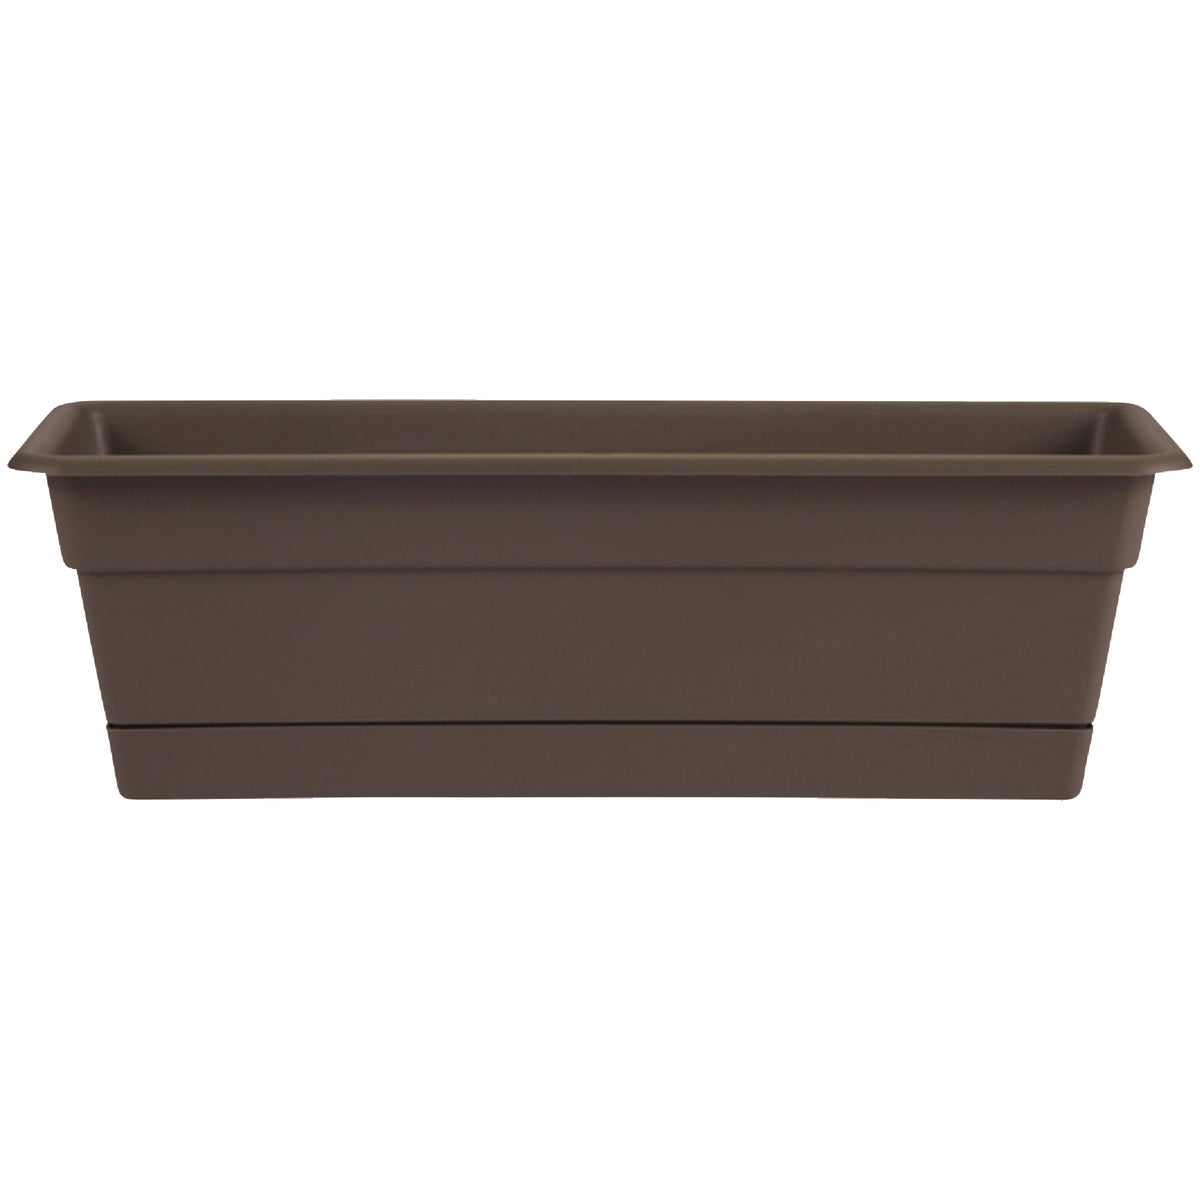 Item 701352, Durable and frostproof resin plastic construction flower box.